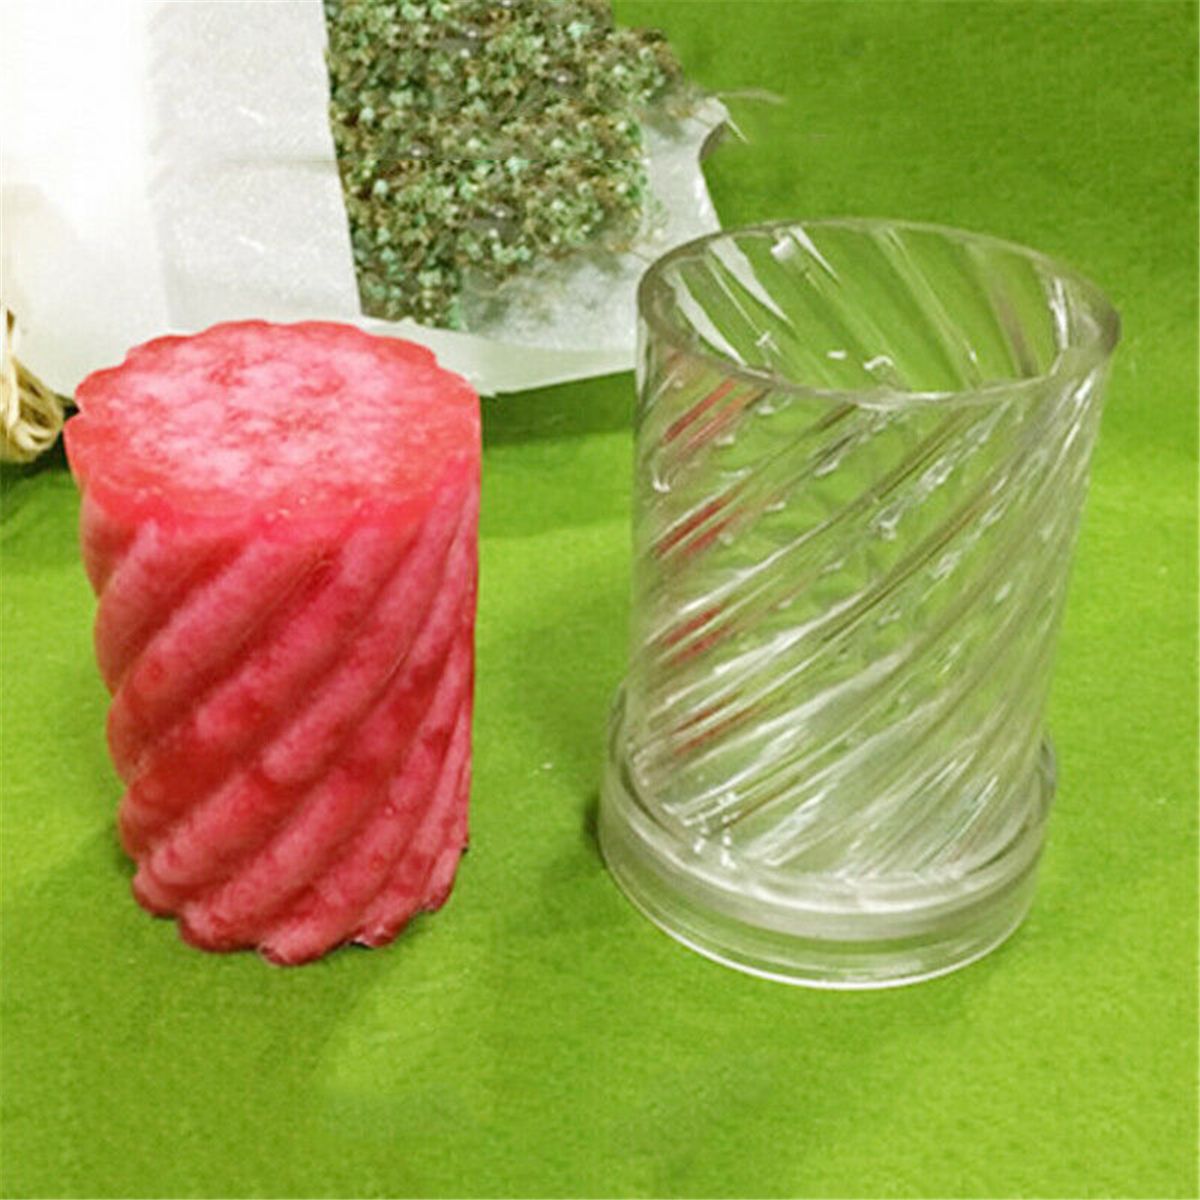 Candle-Mold-Plastic-Spiral-Shape-DIY-Craft-Tool-For-Wax-Candle-Mould-Making-1527730